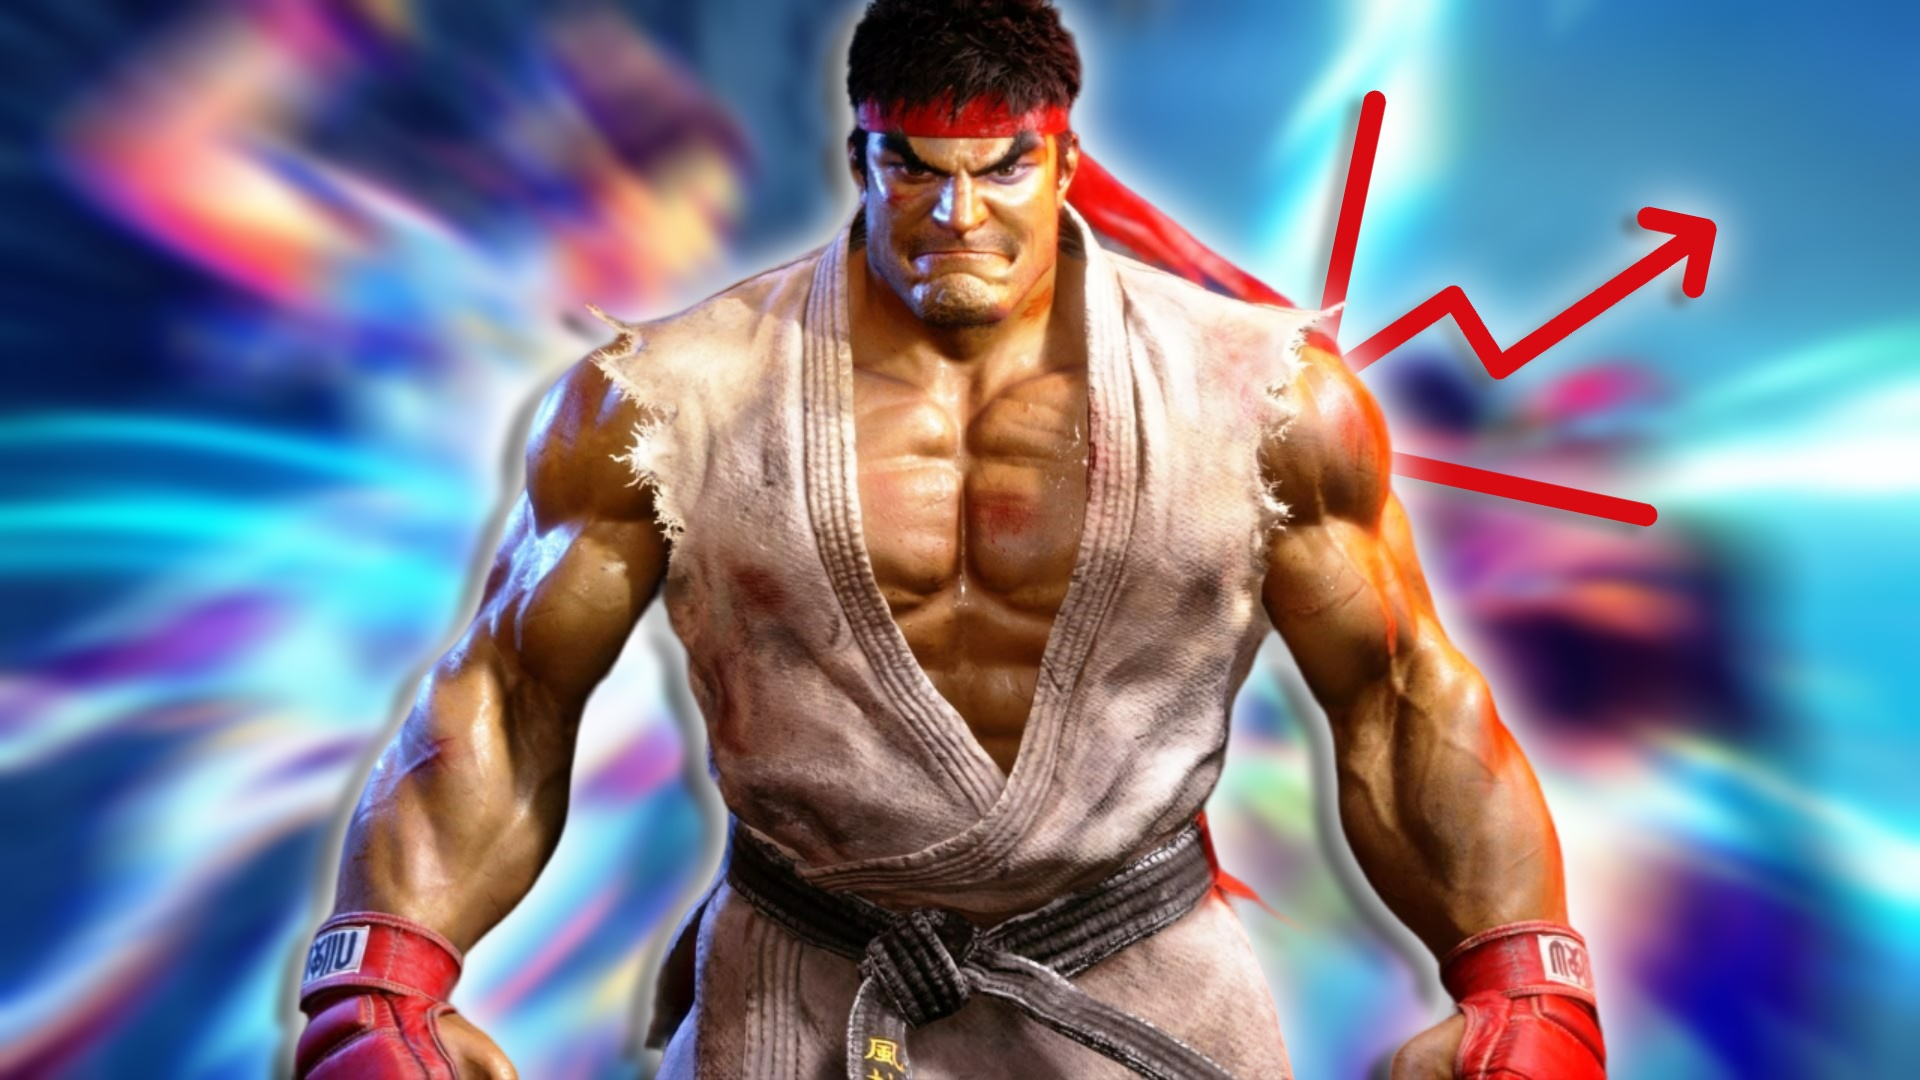 Street Fighter 6 trailer shows off old characters and new modes